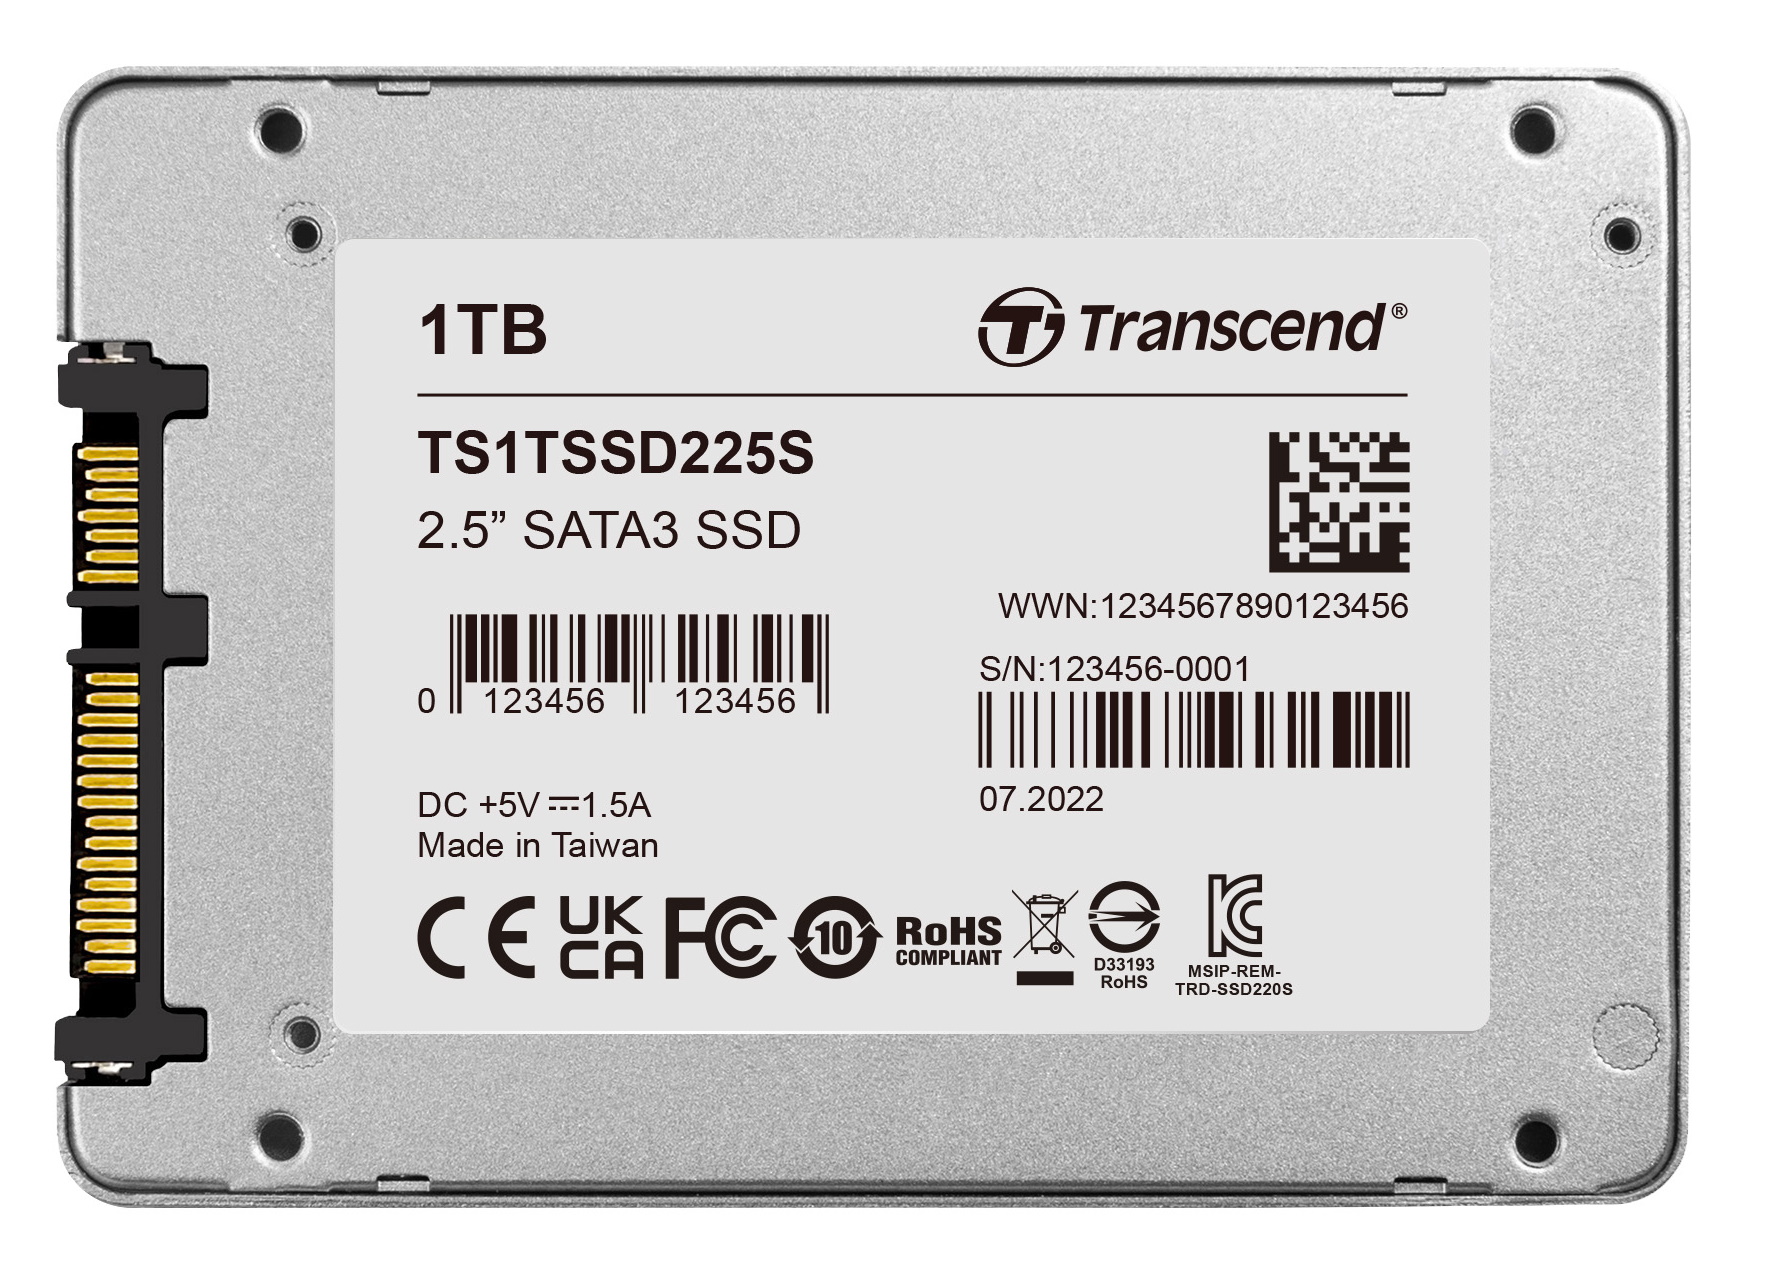 Transcend SSD220S 480GB SSD review